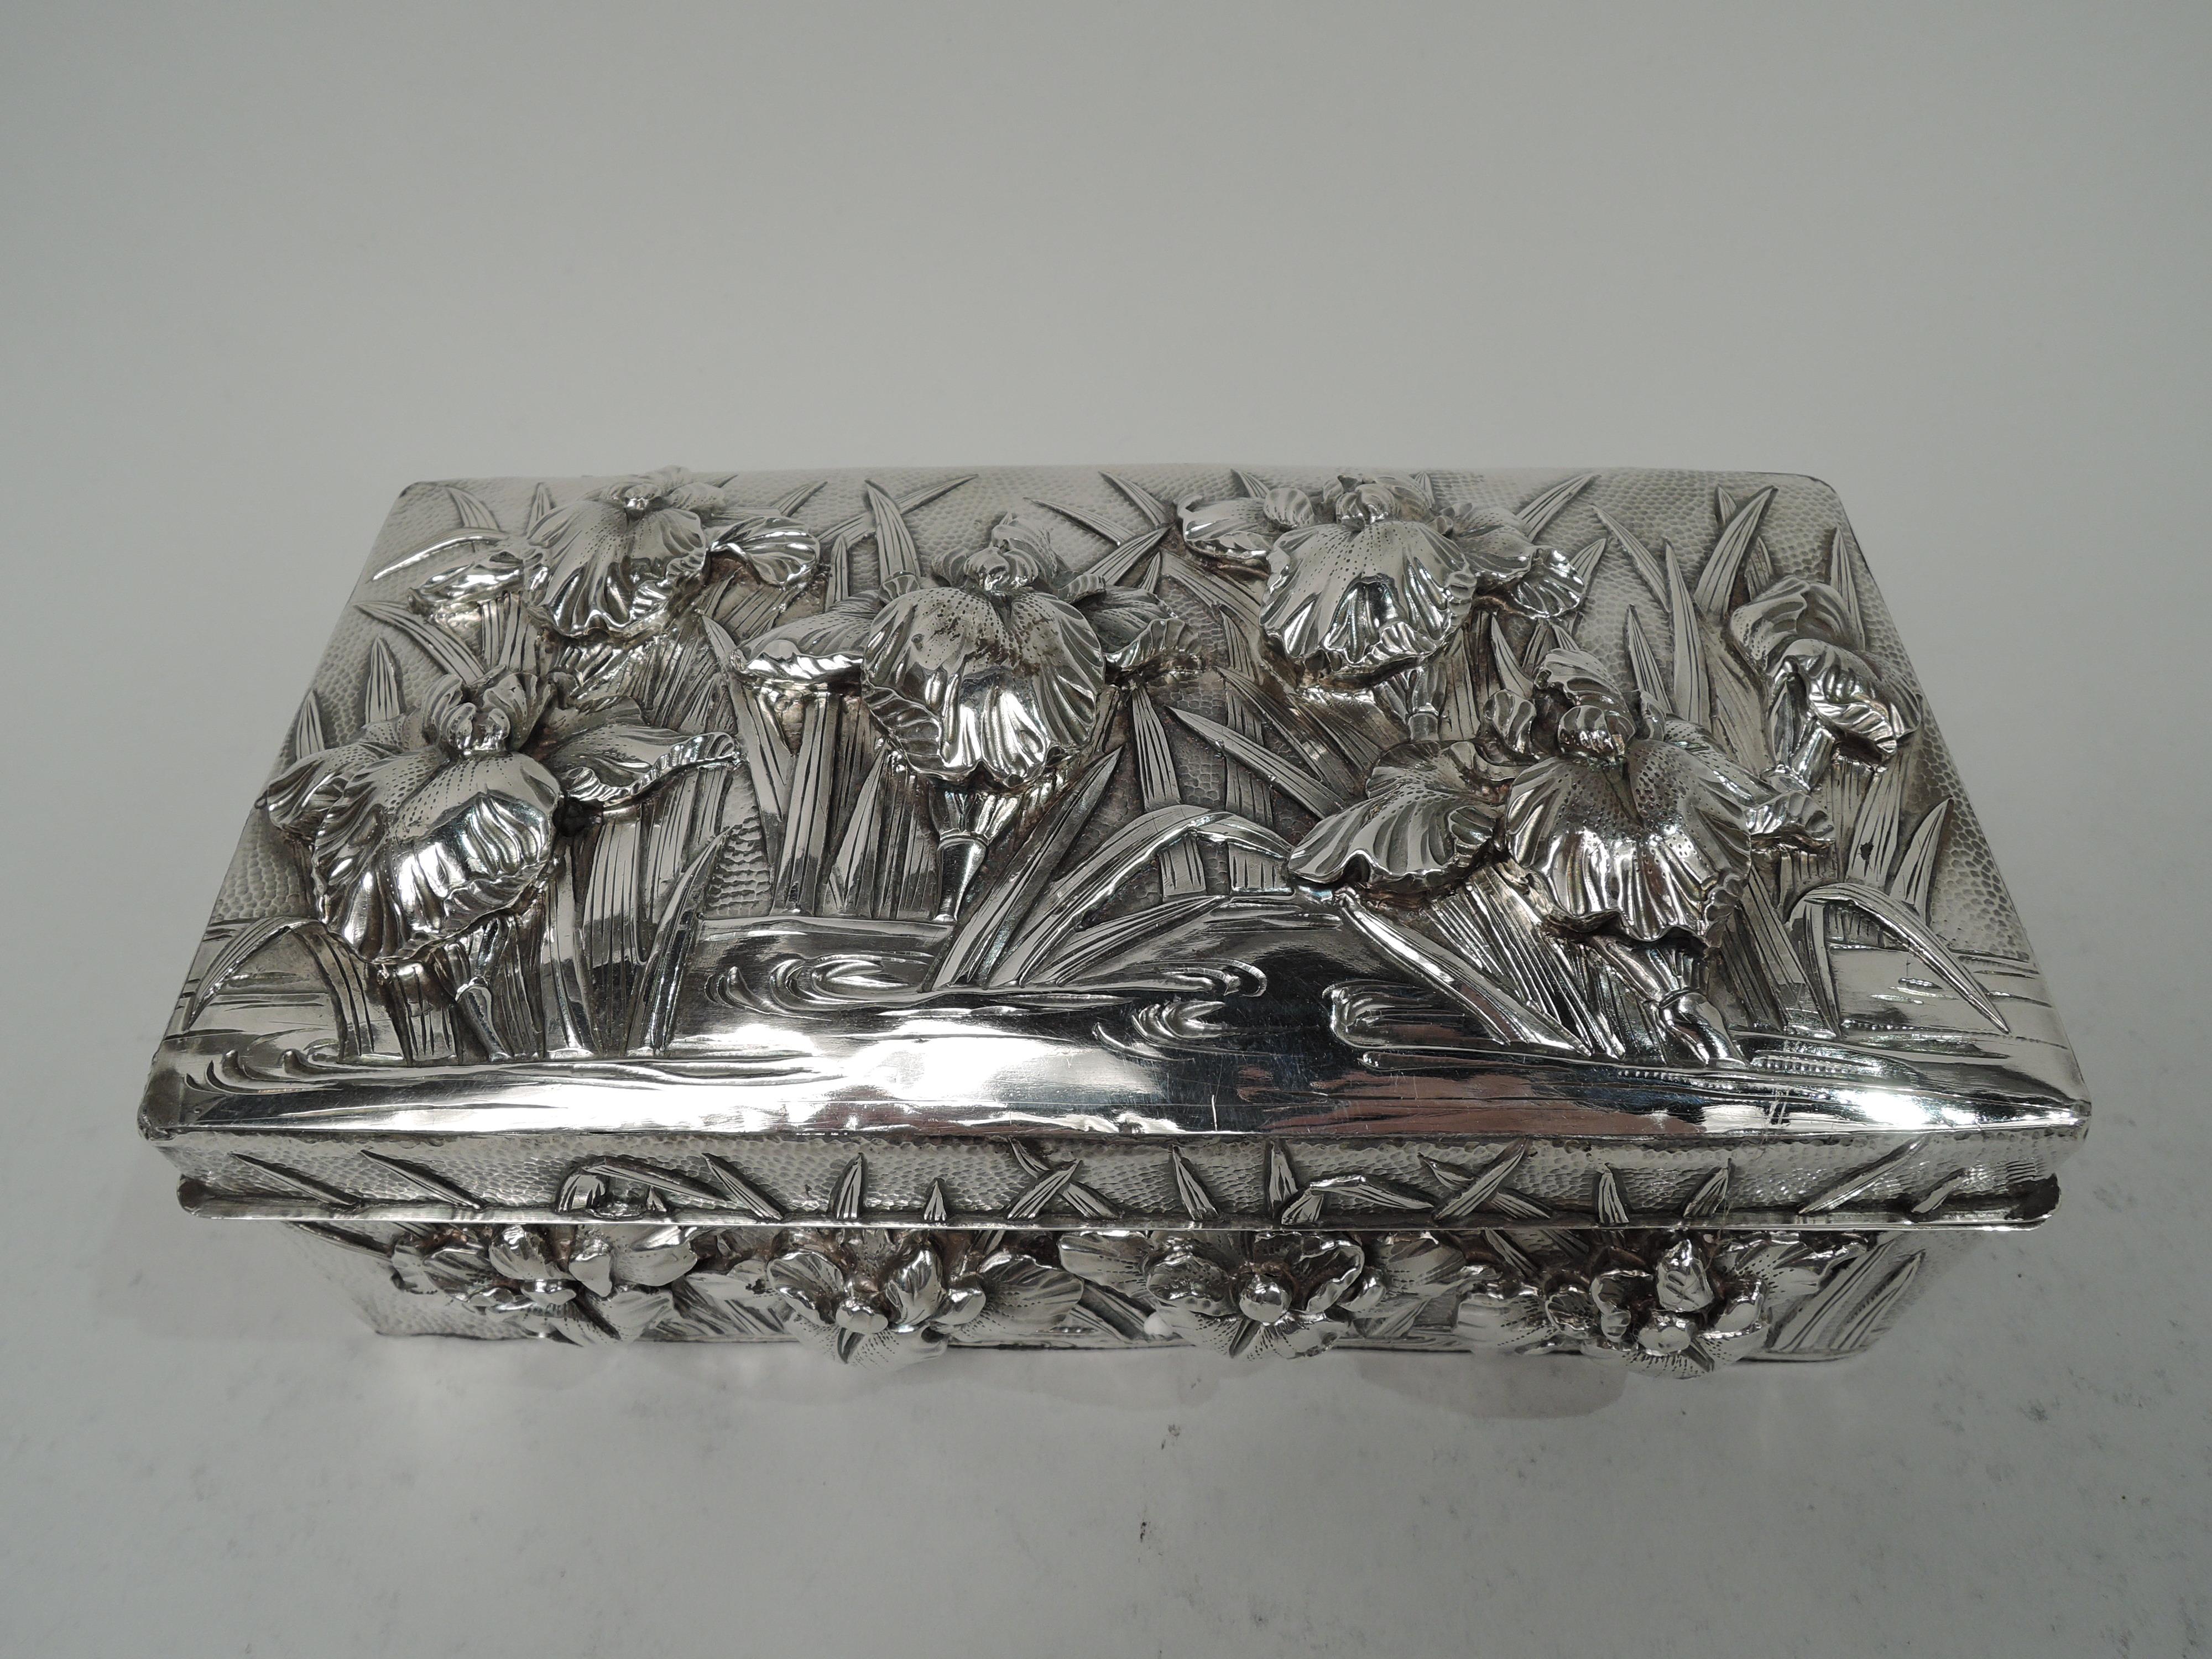 Japanese silver box, ca 1890. Rectangular with straight sides and hinged cover. On cover top and box sides are high-relief iris flowers and tendrils in eddying water. Stippled ground. Box and cover interior lined with stained wood. Open